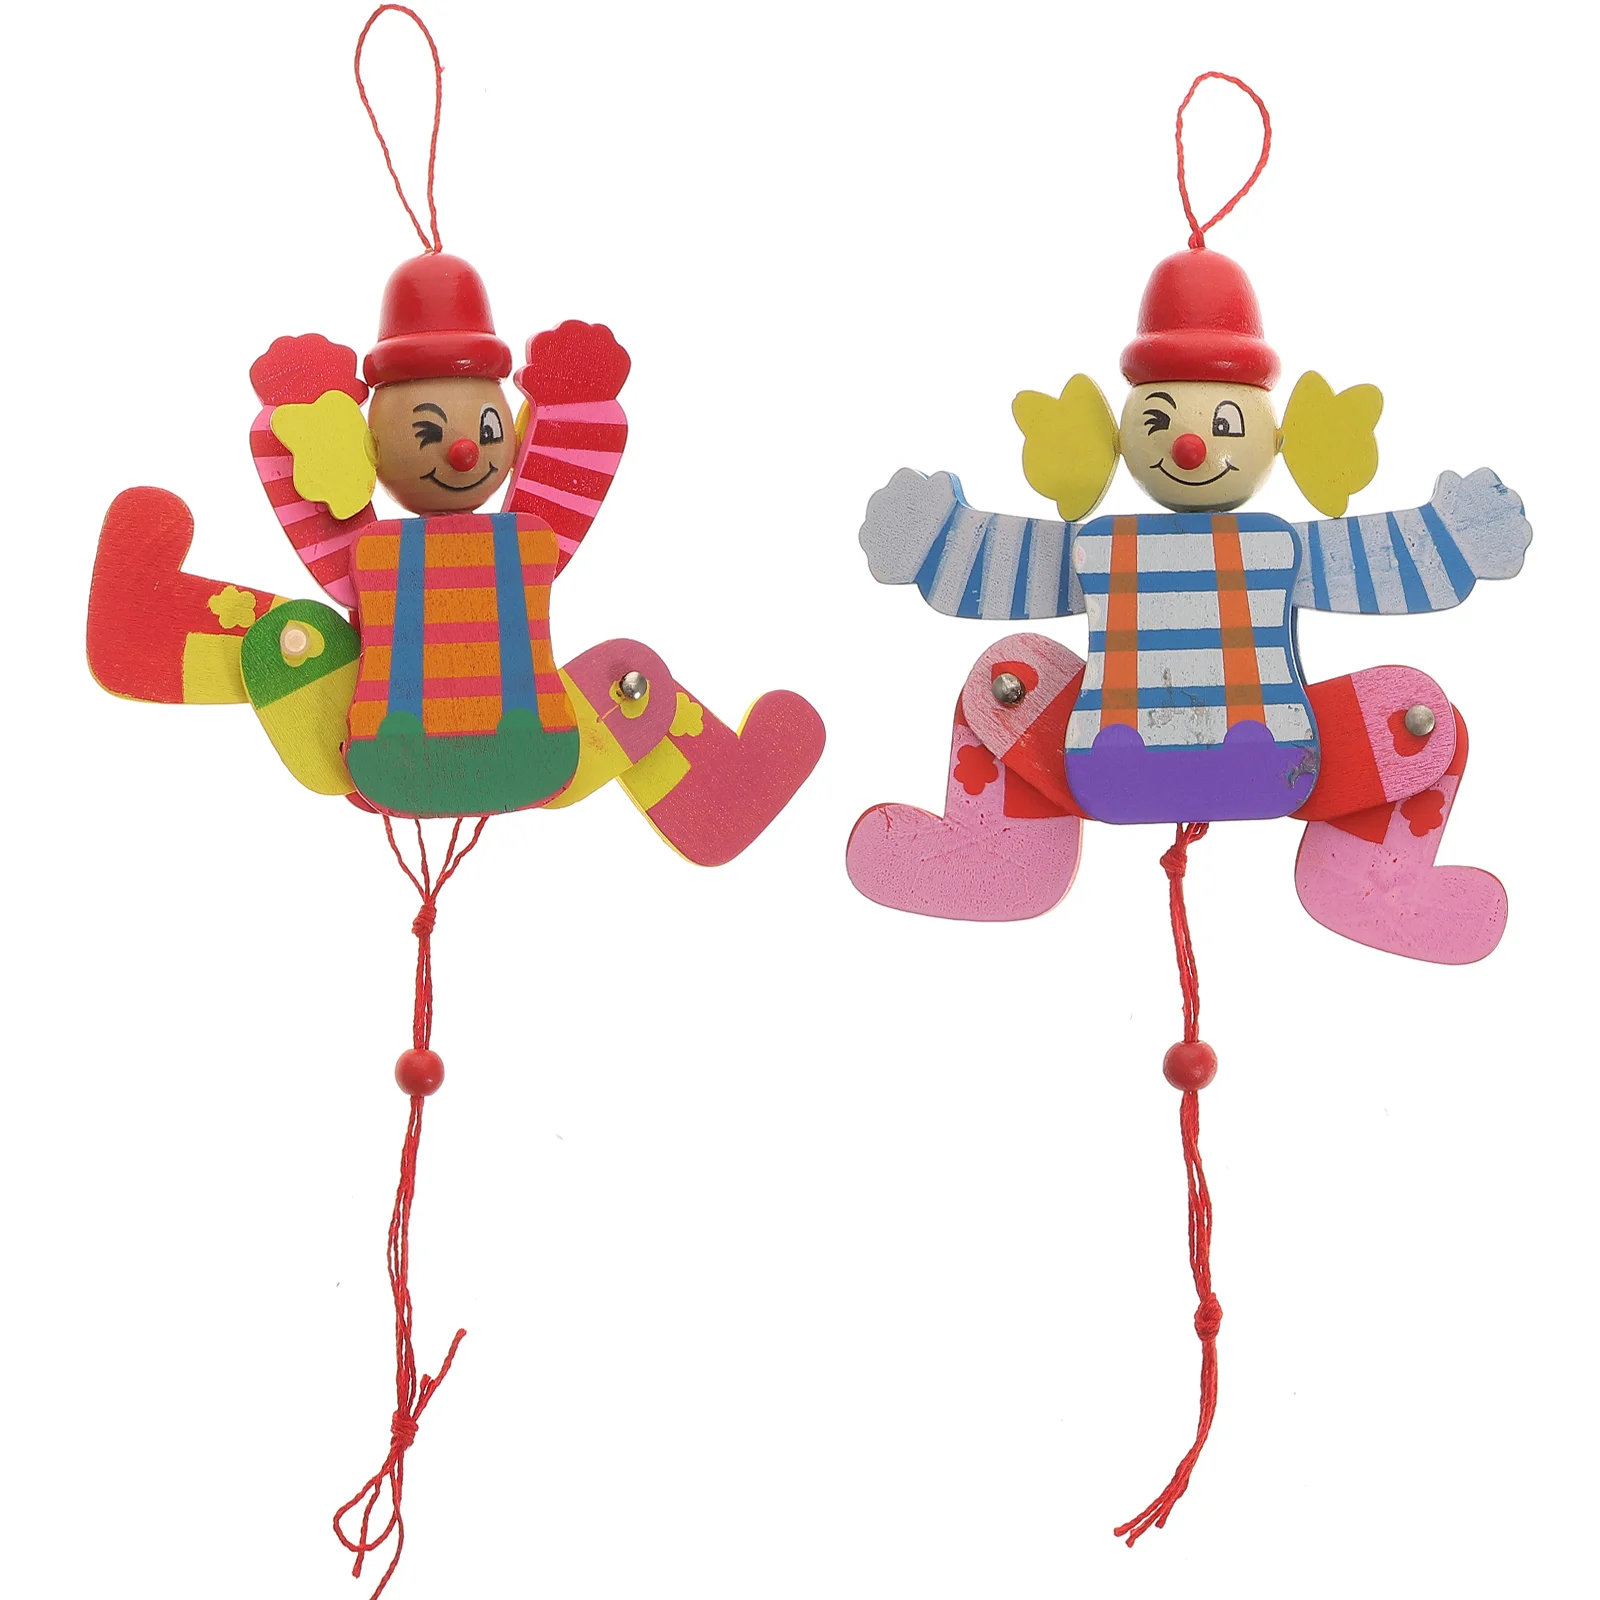 Marionettes Puppet Pull String Clown Kids Marionette Toy Clown Marionettes Puppet Wood Clown Toy marionettes puppet pull string clown kids marionette toy clown marionettes puppet wood clown toy